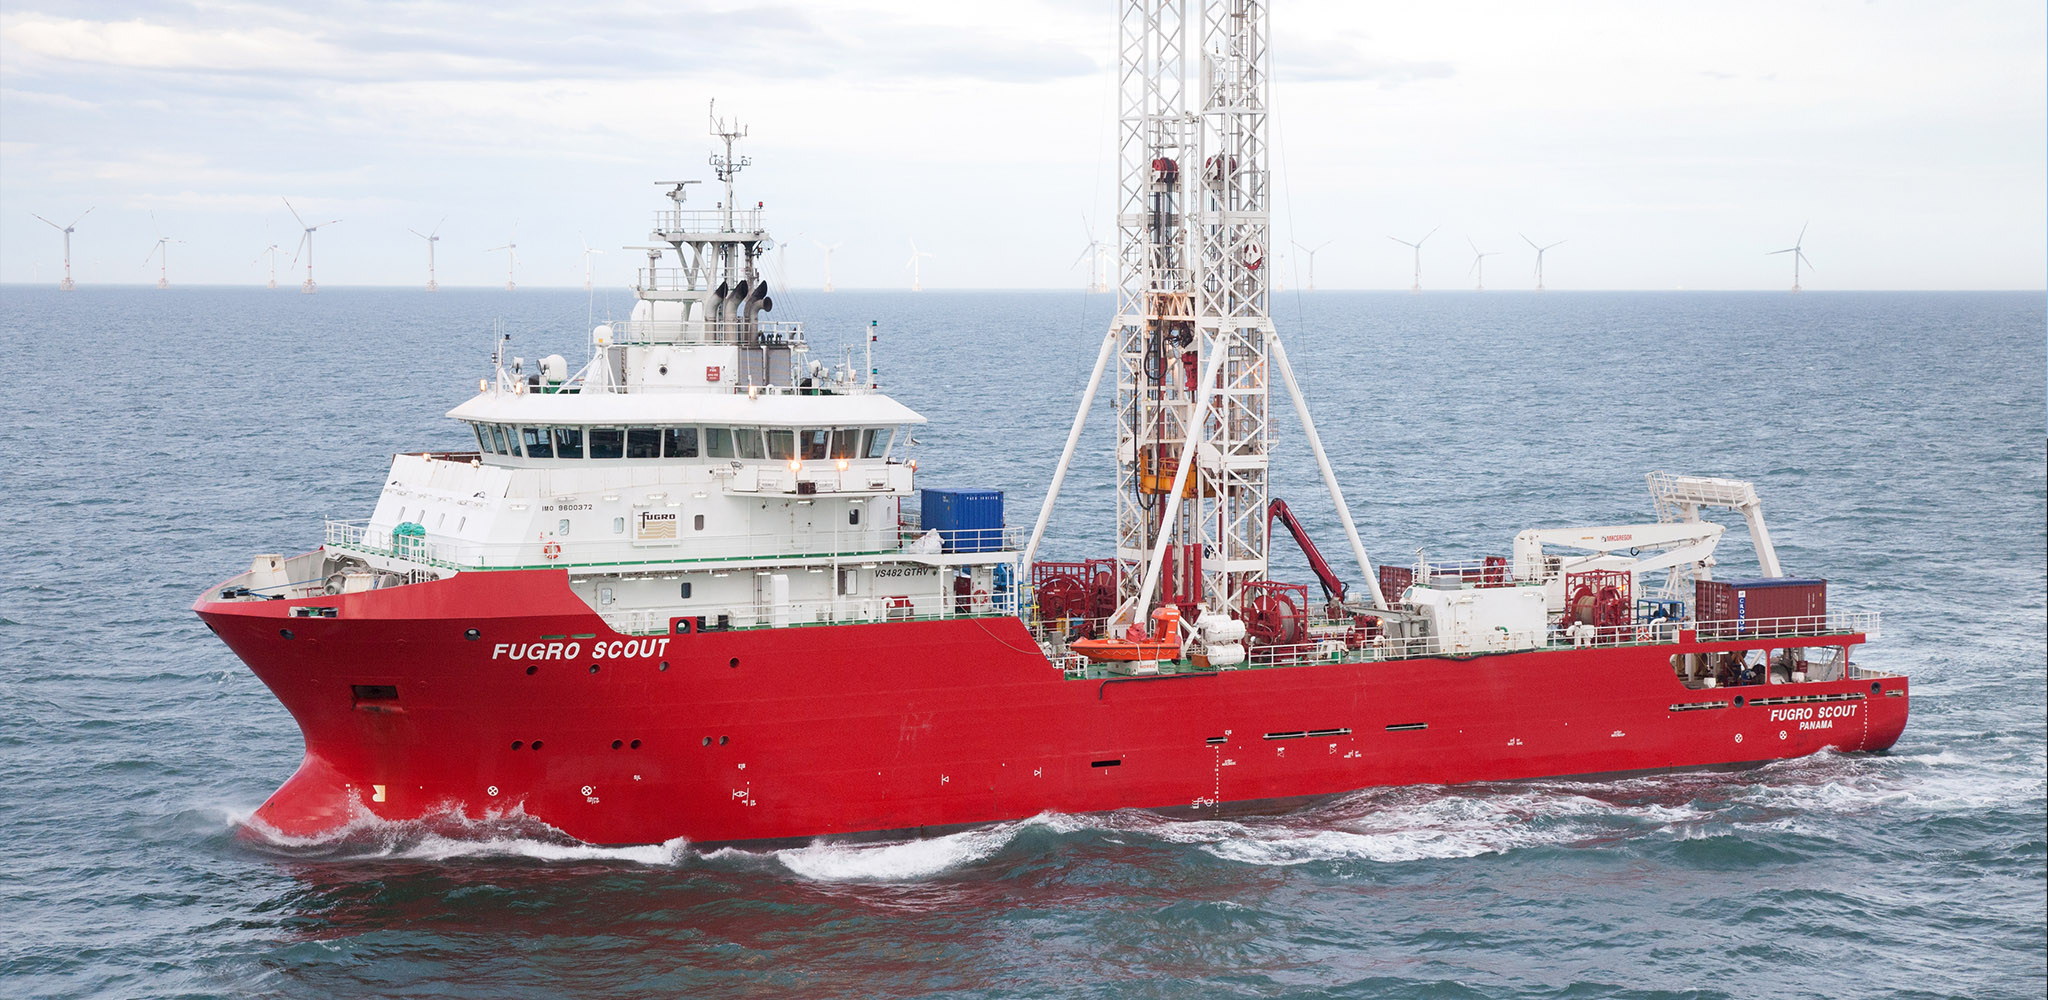 Fugro wins offshore wind site investigation contract in Germany